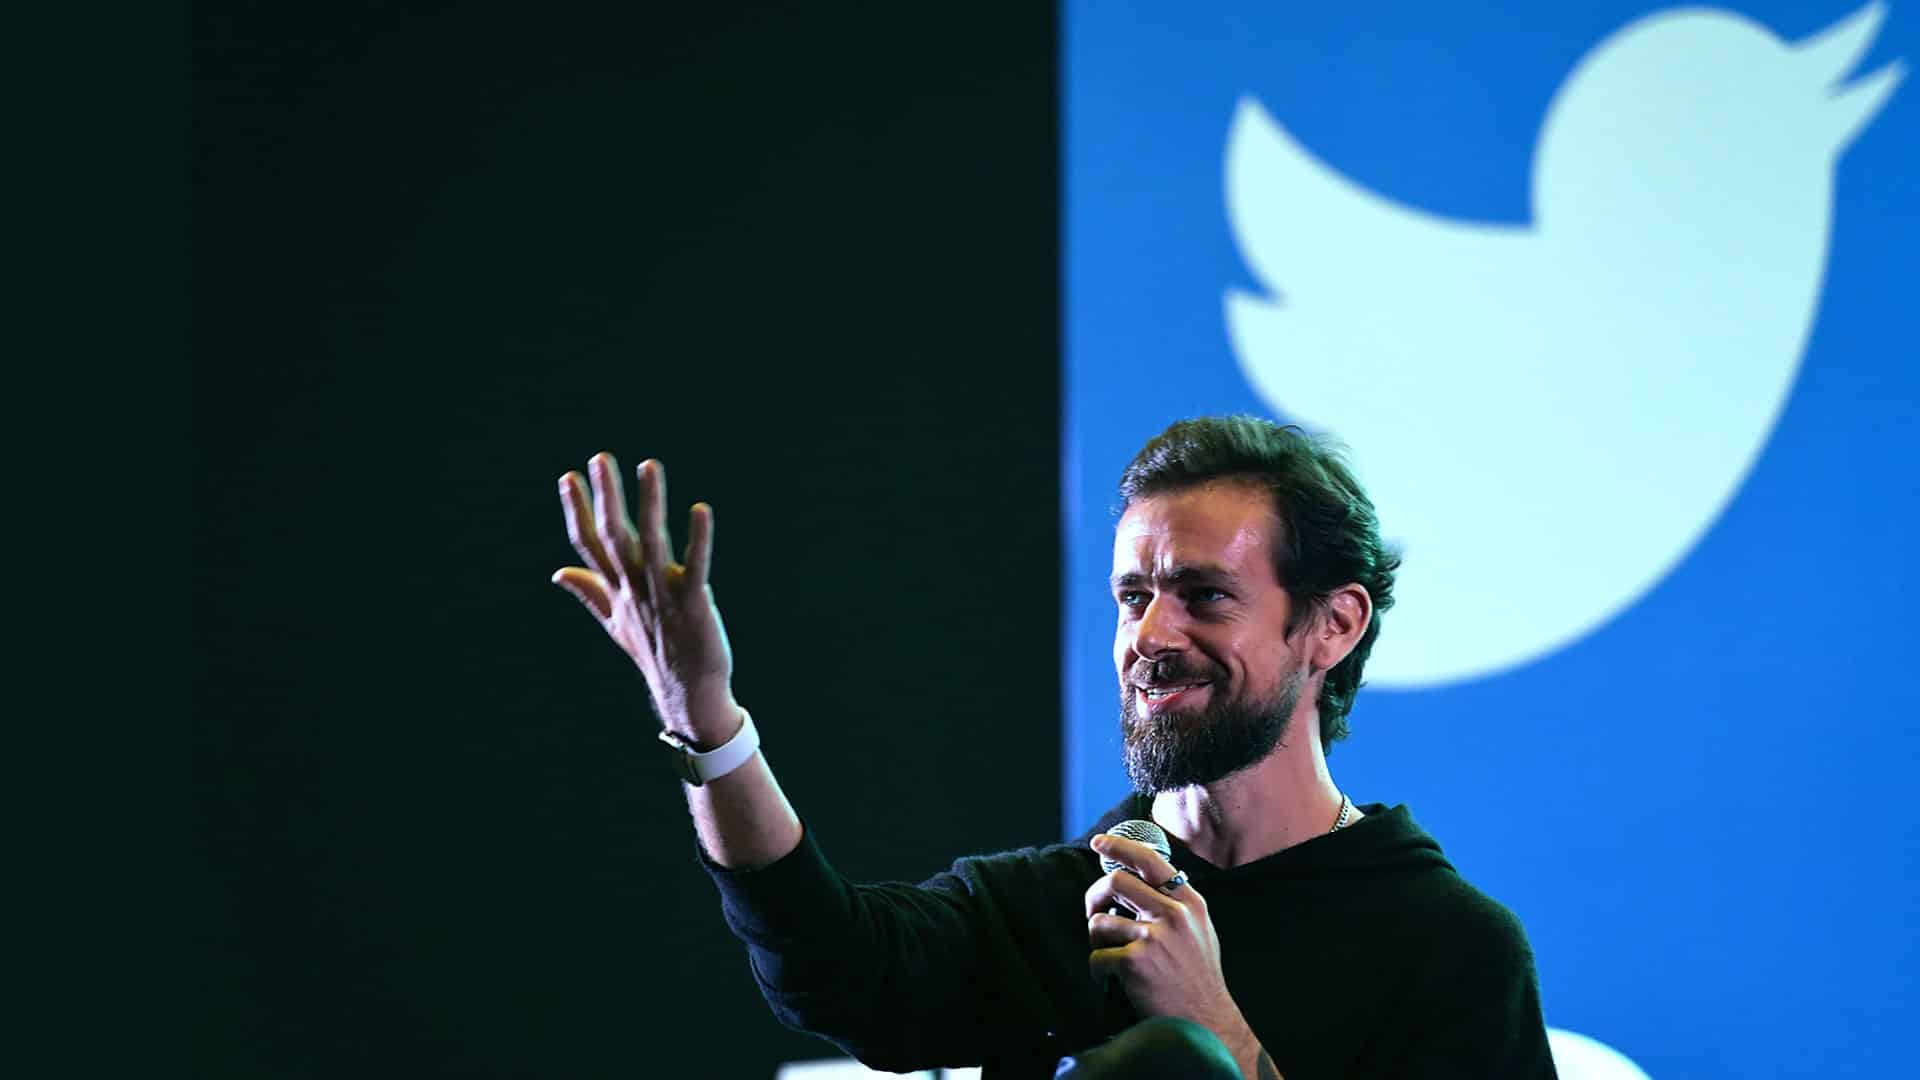 Twitter intends to make its content moderation practices more transparent: Jack Dorsey